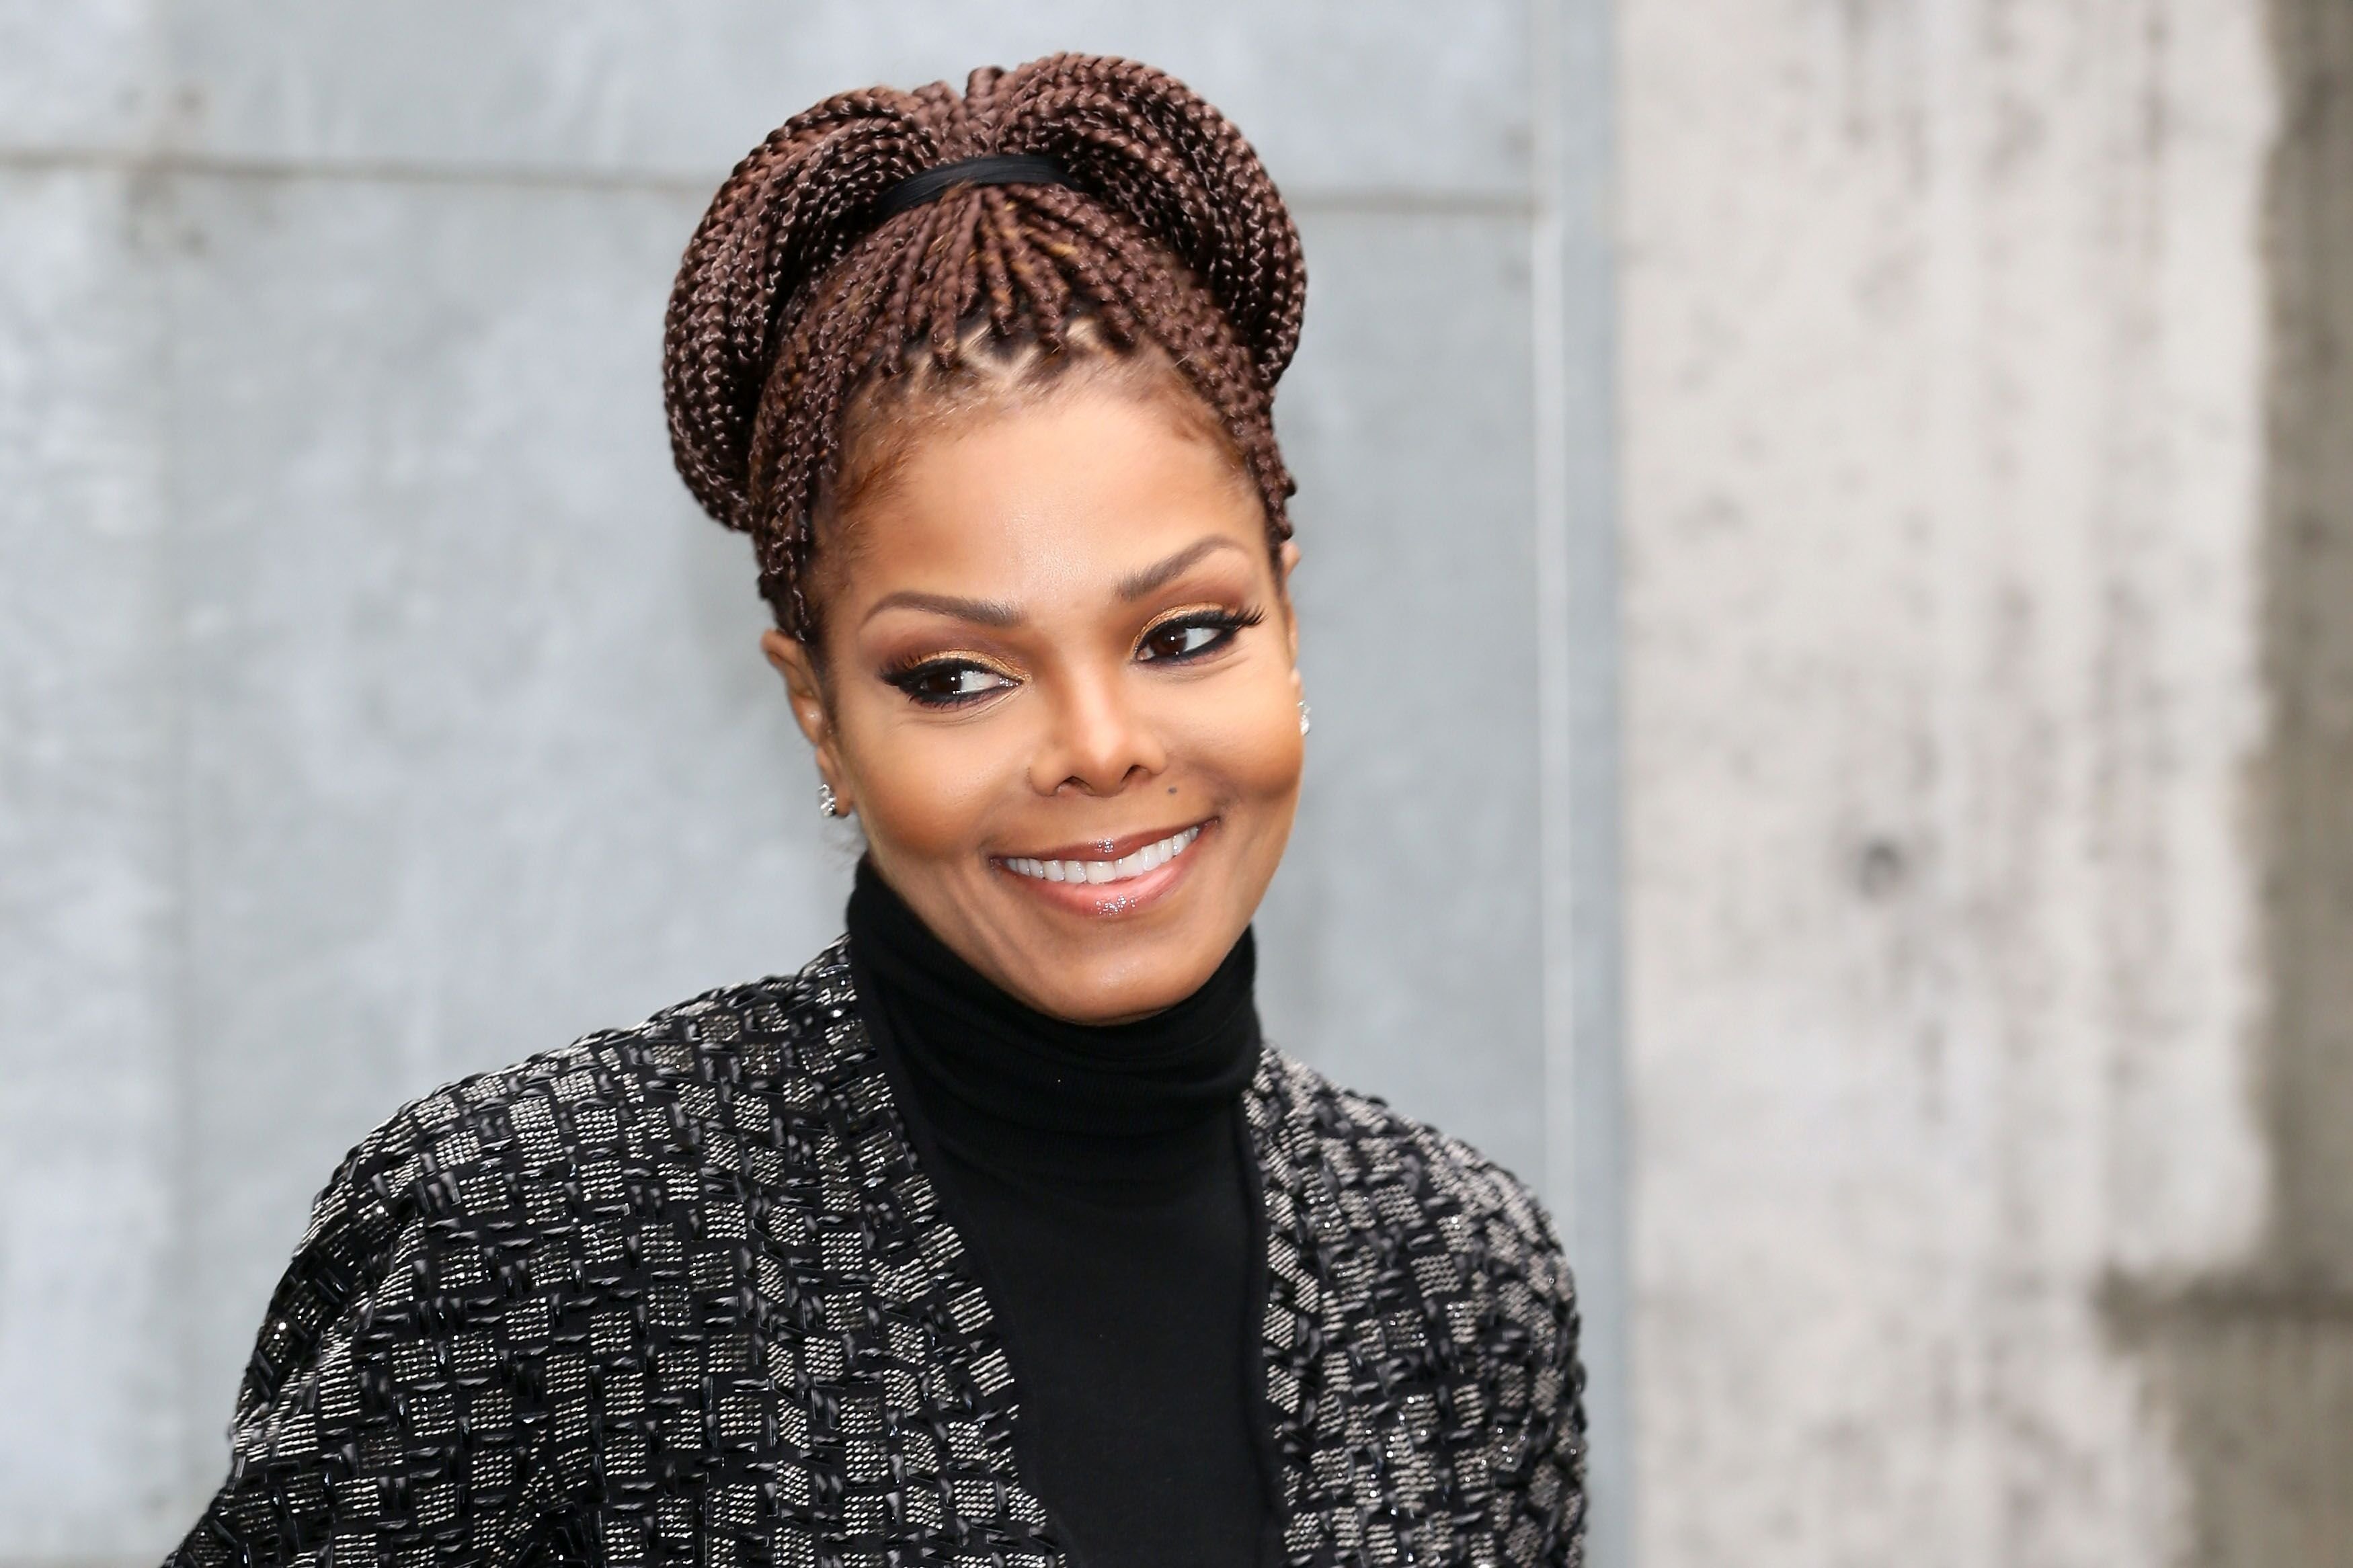 Janet Jackson at the Giorgio Armani fashion show during Milan Fashion Week in February 2014. | Photo: Getty Images